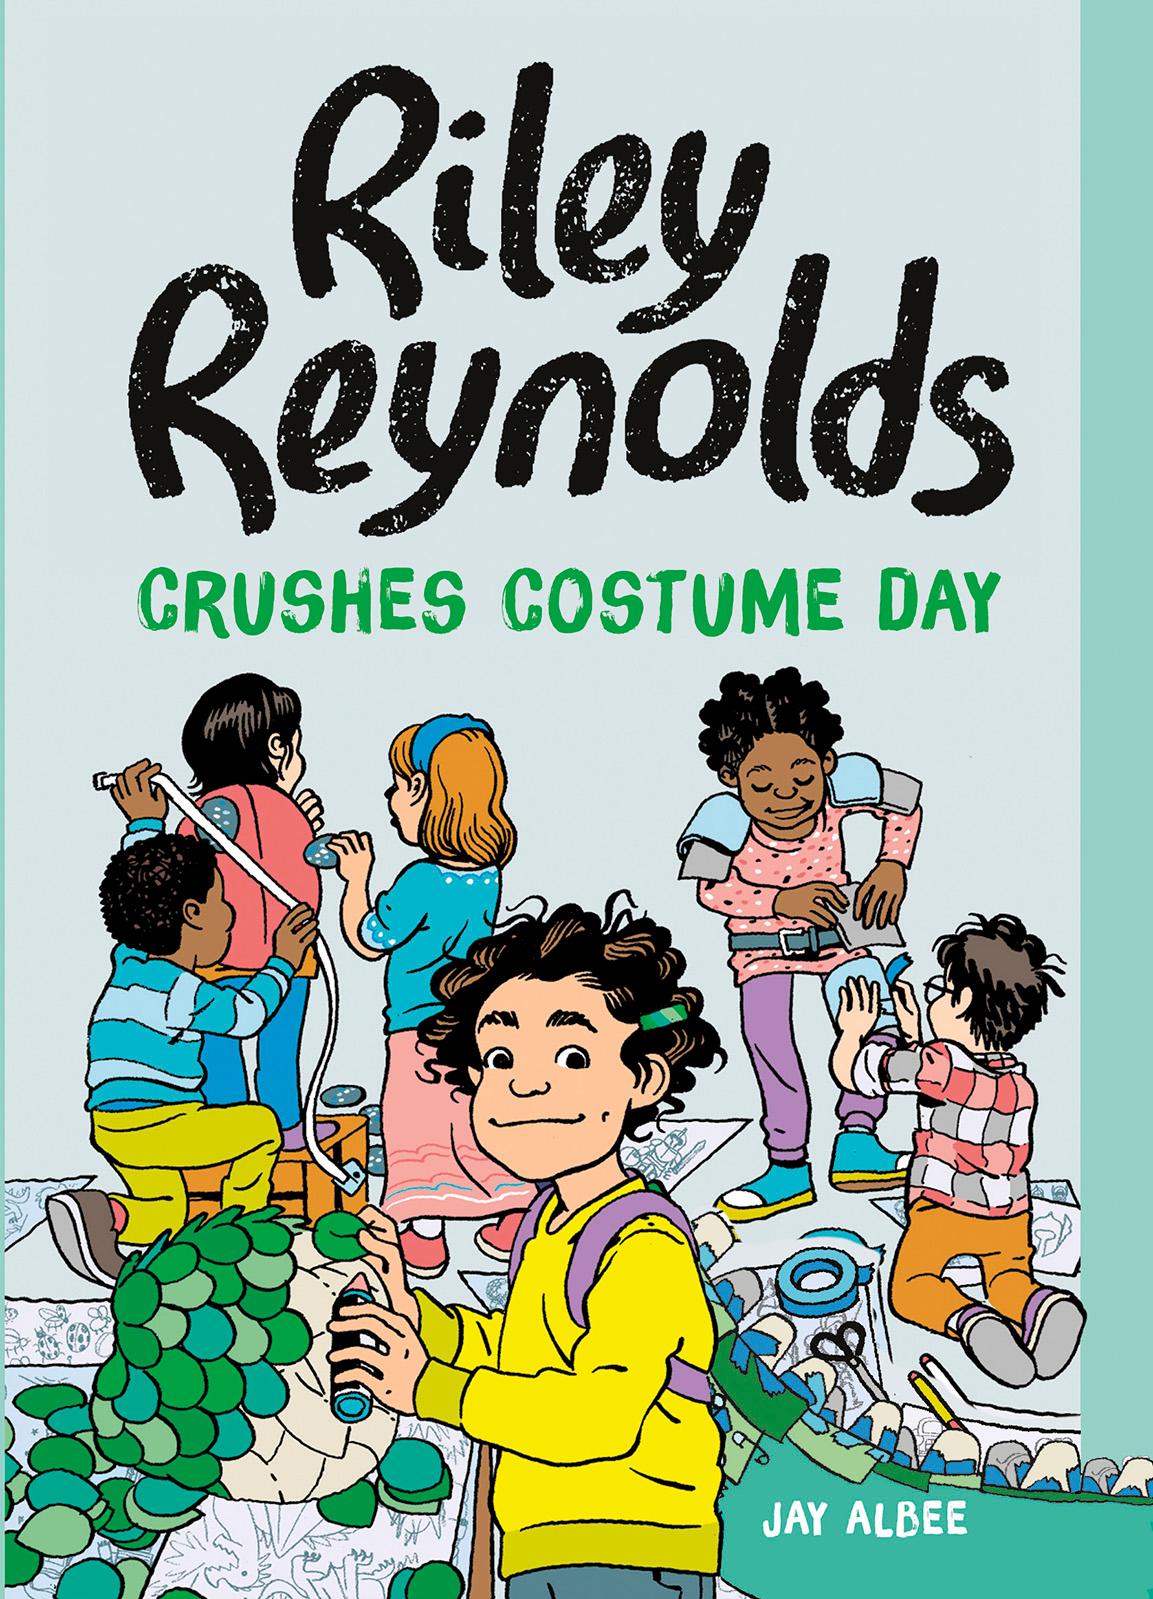 Cover illustration for Riley Reynolds Crushes Costume Day by Jay Albee shows Riley Reynolds, nonbinary fourth grader, is crafting a paper mache dragon head and tail. They are surrounded by friends and classmates helping each other craft costumes. - Image credit Cover illustration by J. Anthony